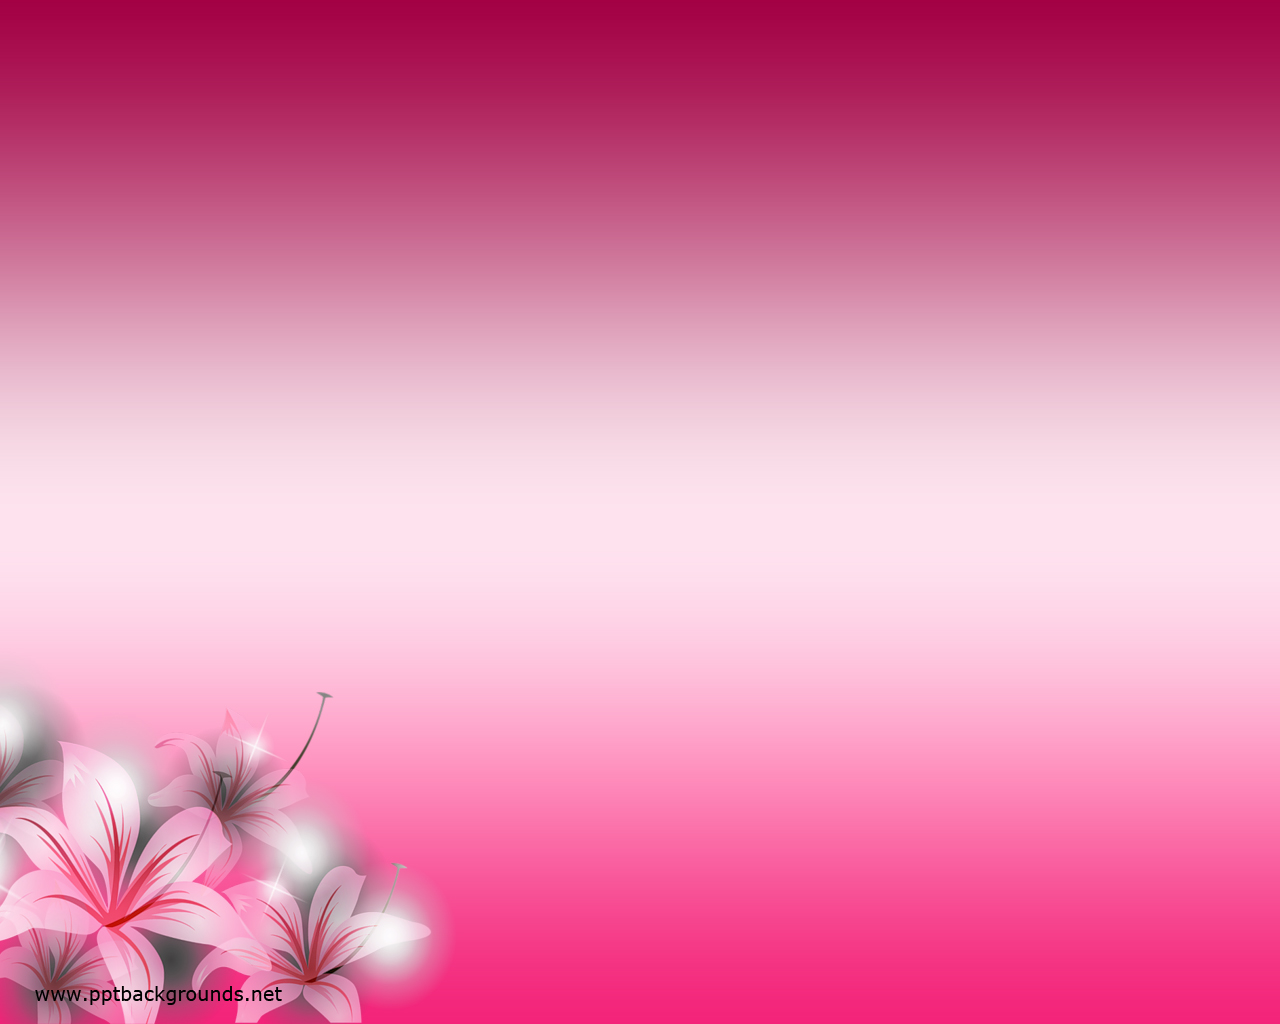 Free download Pink  Flowers Backgrounds  For PowerPoint 